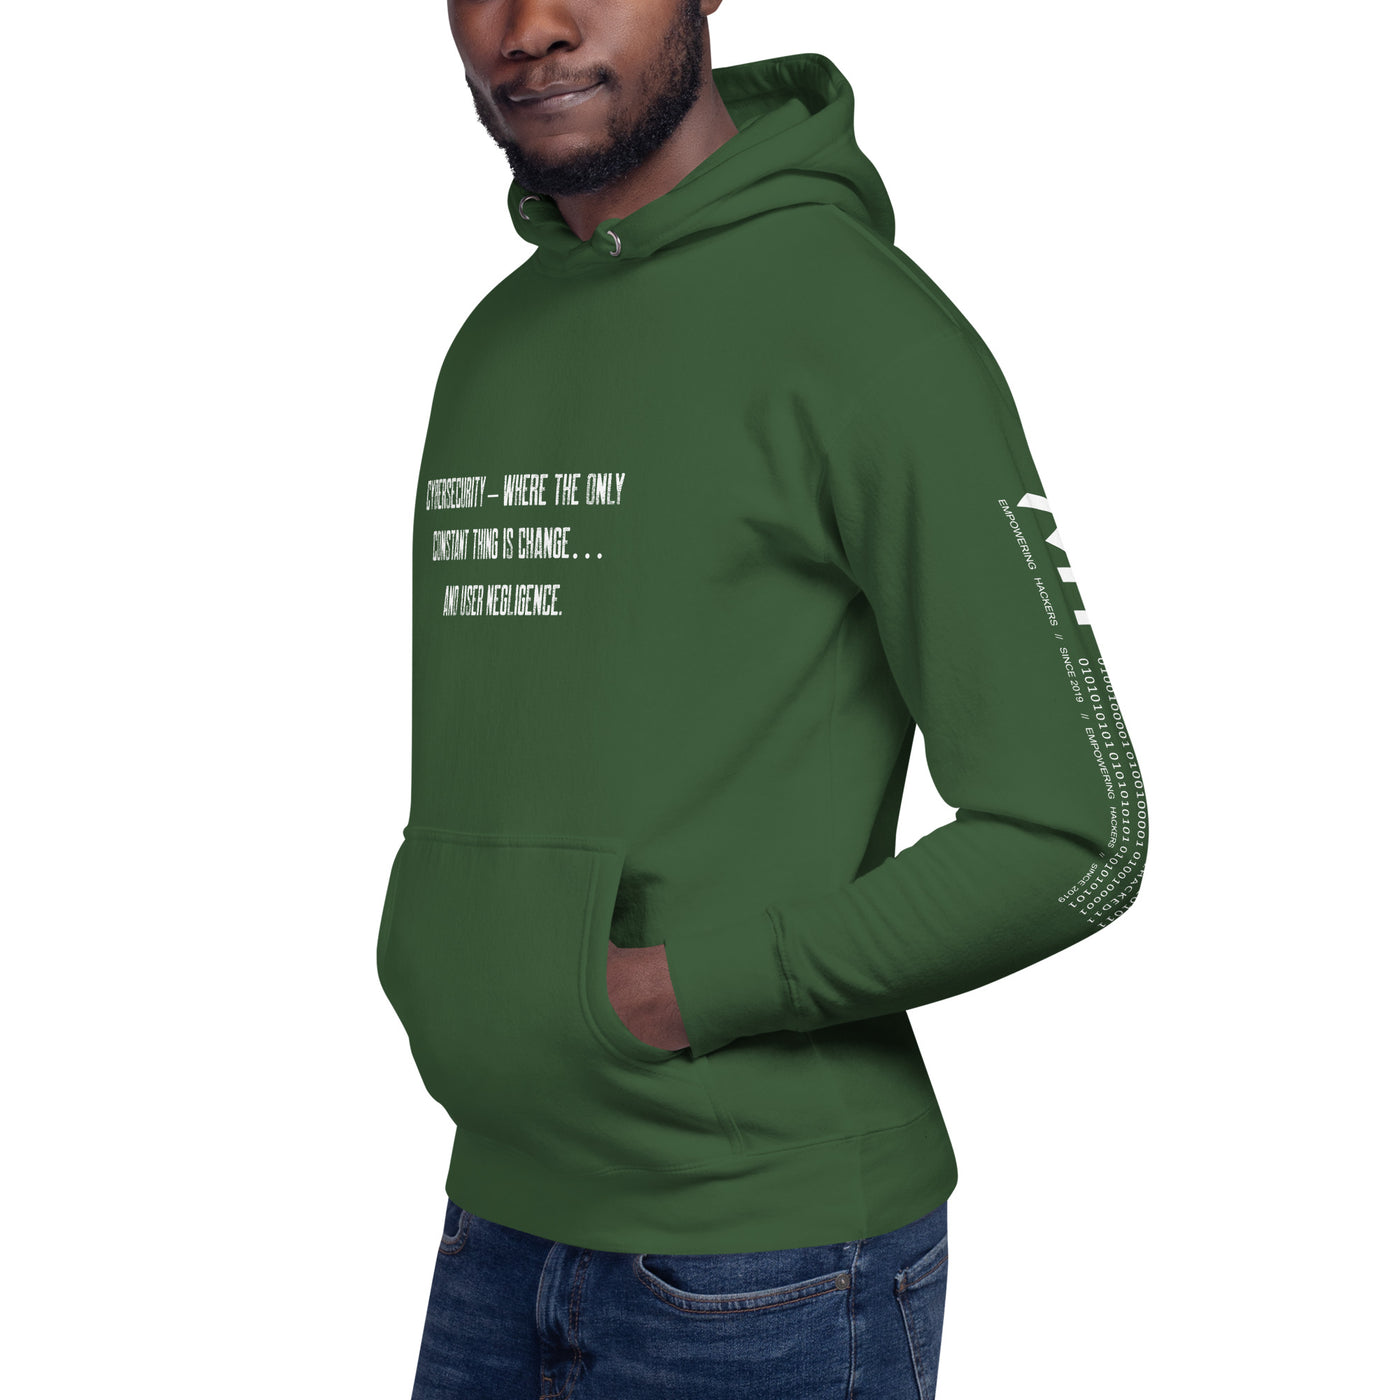 Cybersecurity where the only constant thing is change and user negligence - Unisex Hoodie